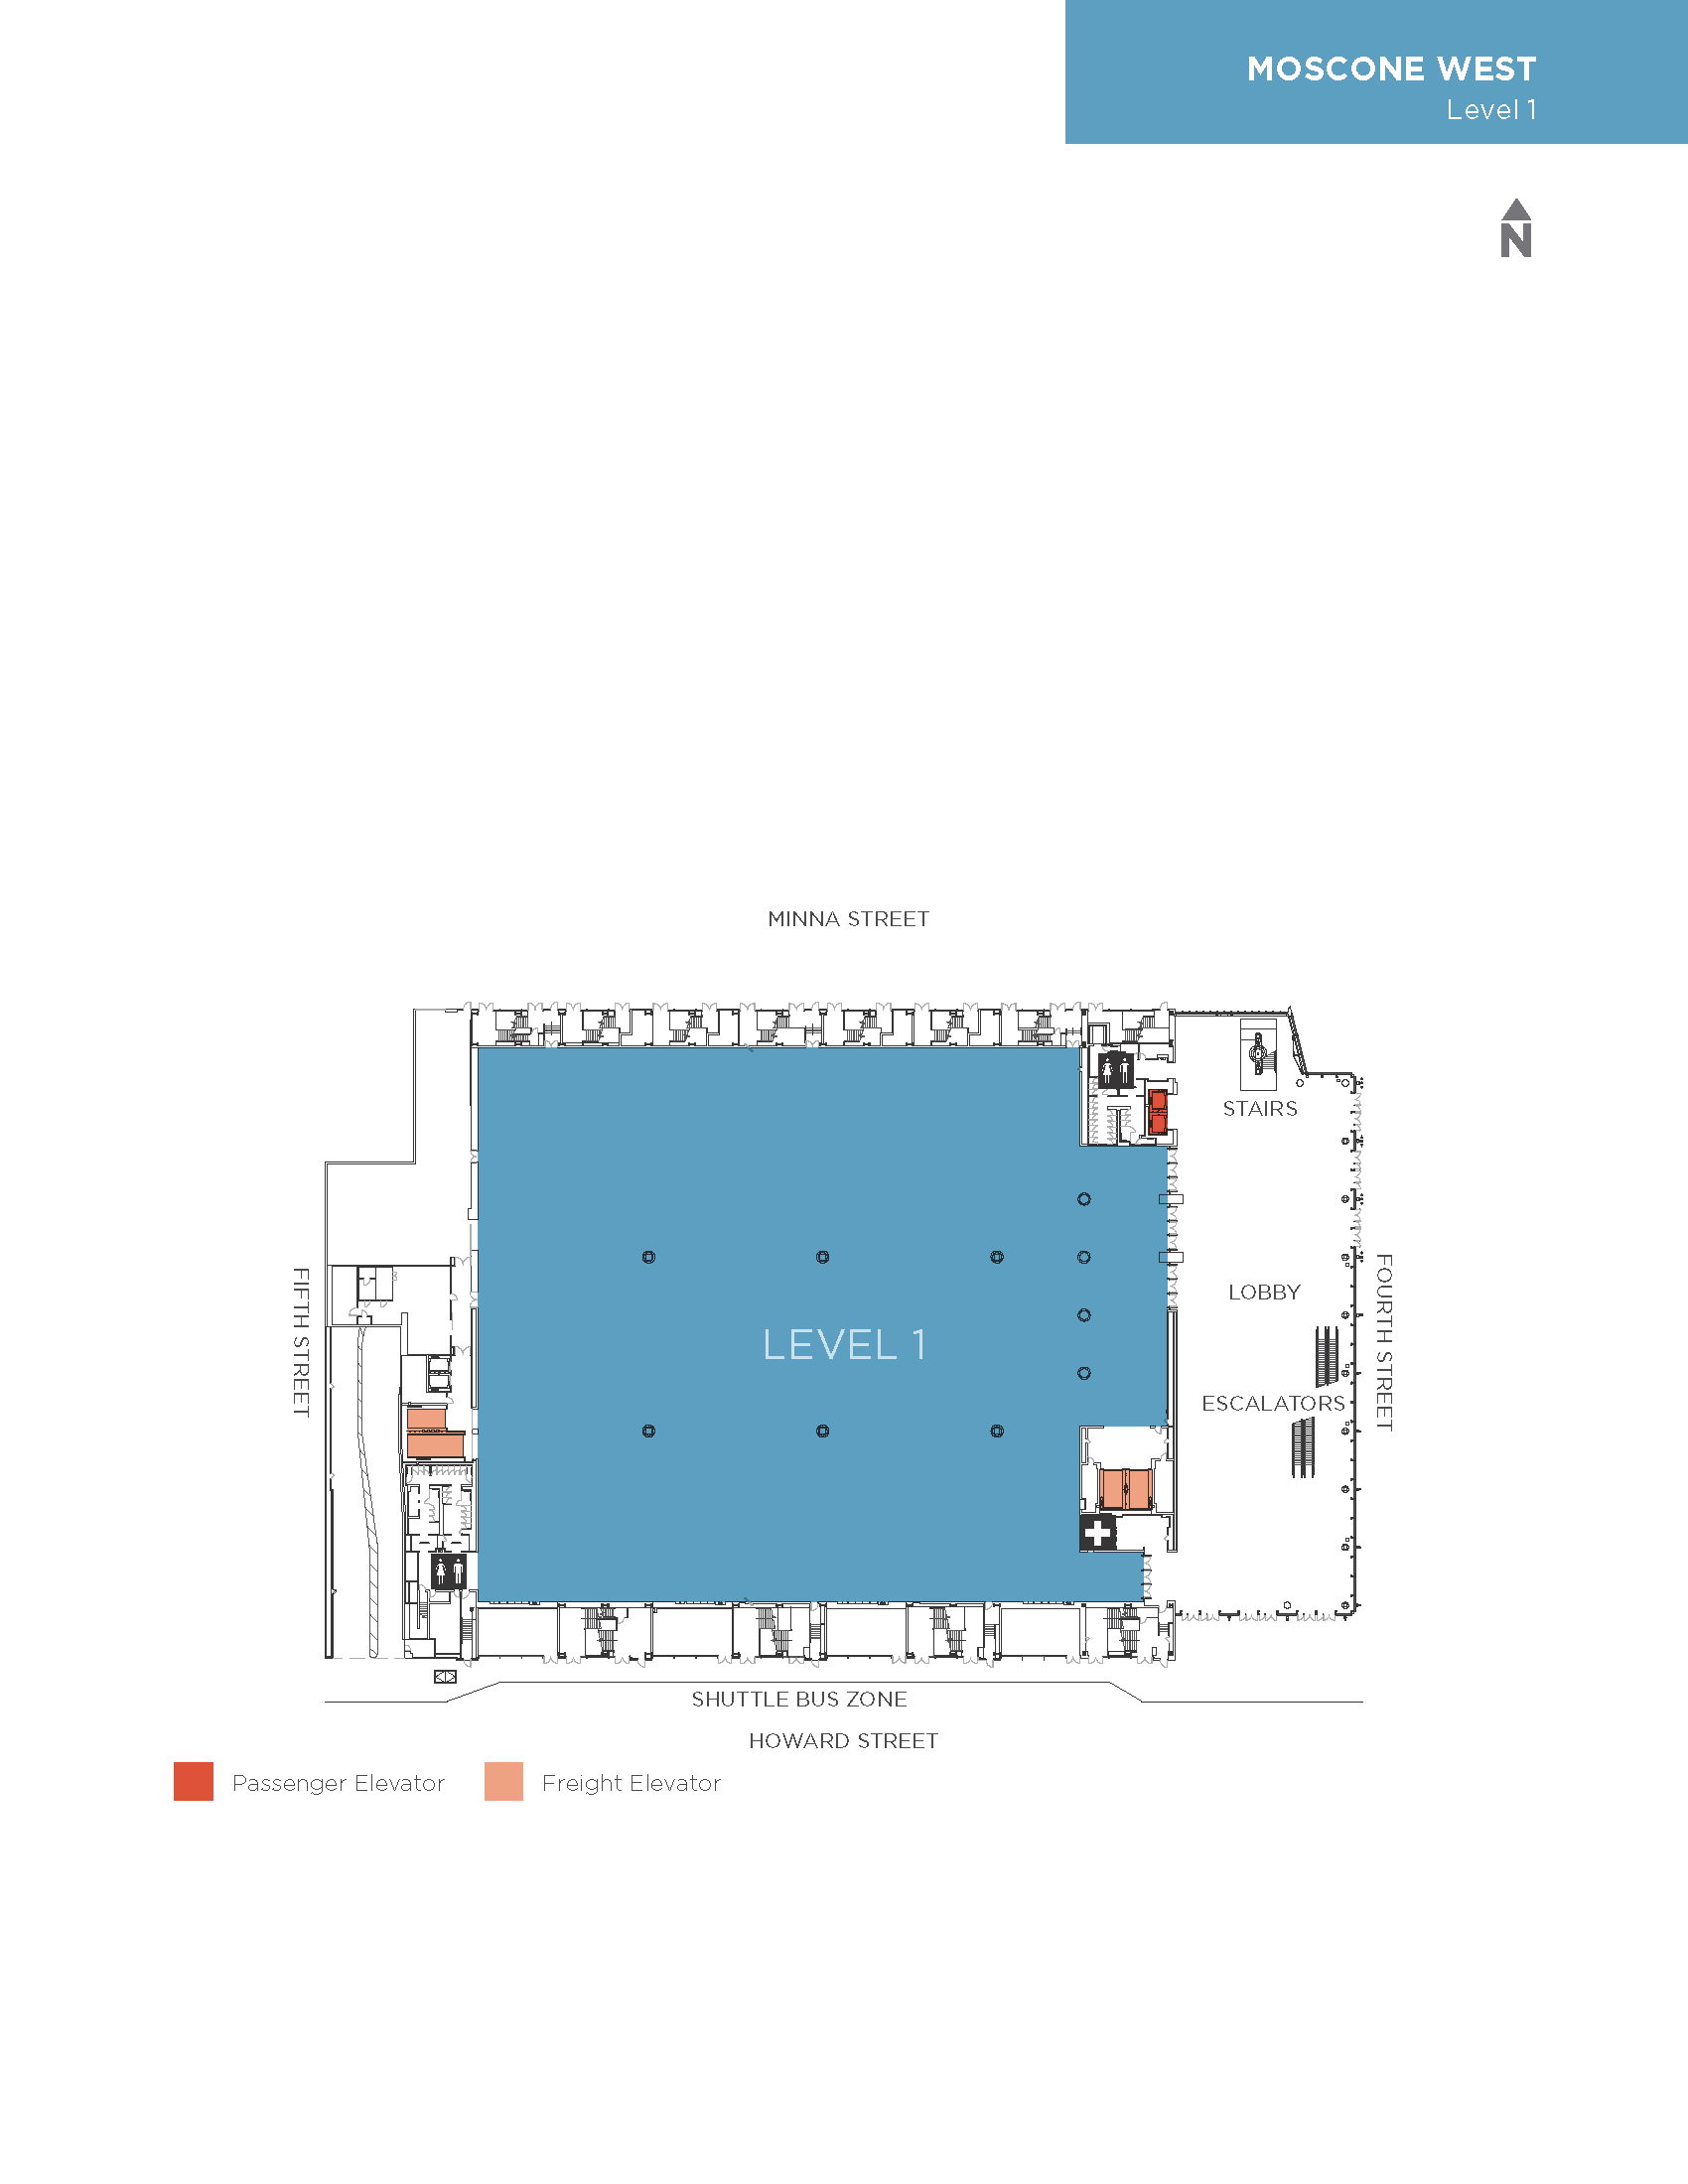 Moscone West Level 1 floorplan from brochure